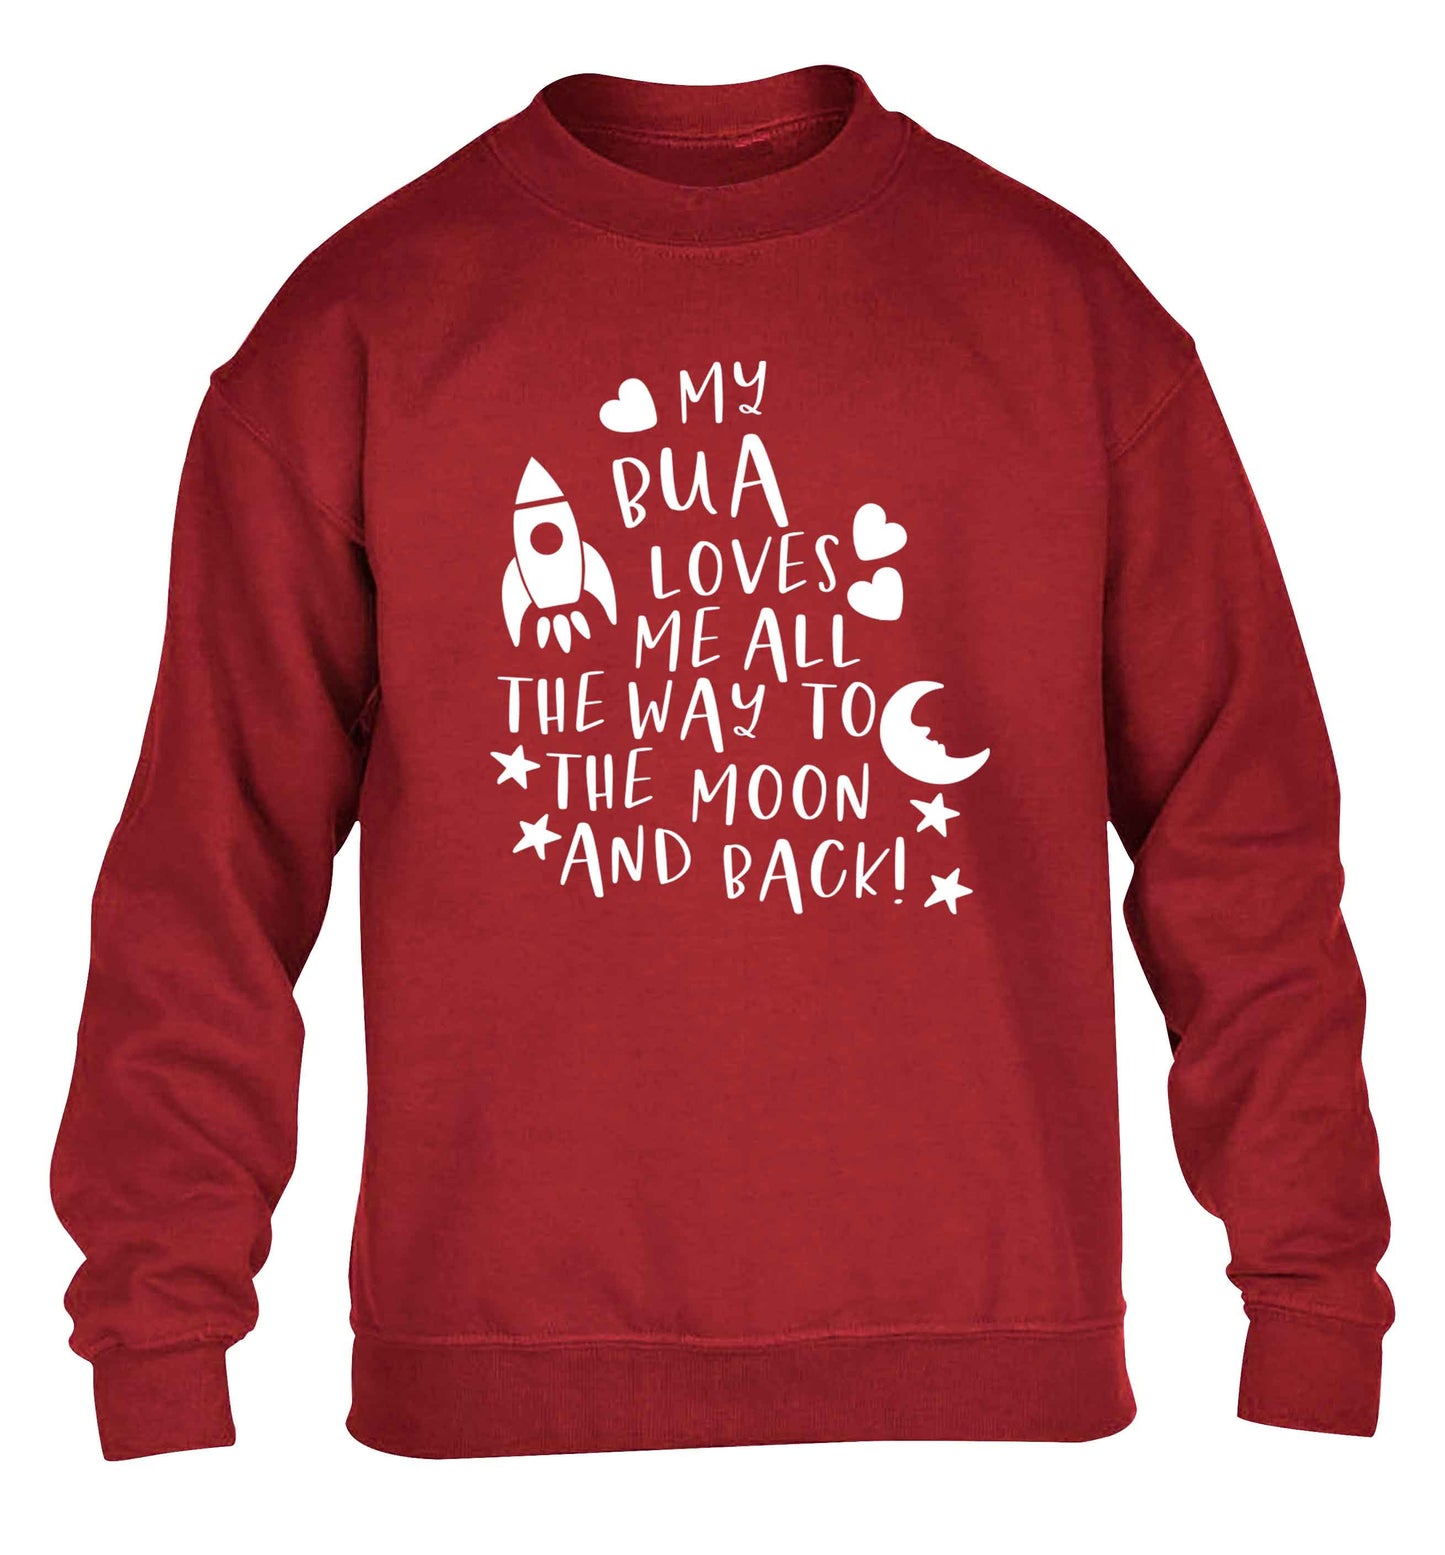 My bua loves me all they way to the moon and back children's grey sweater 12-13 Years